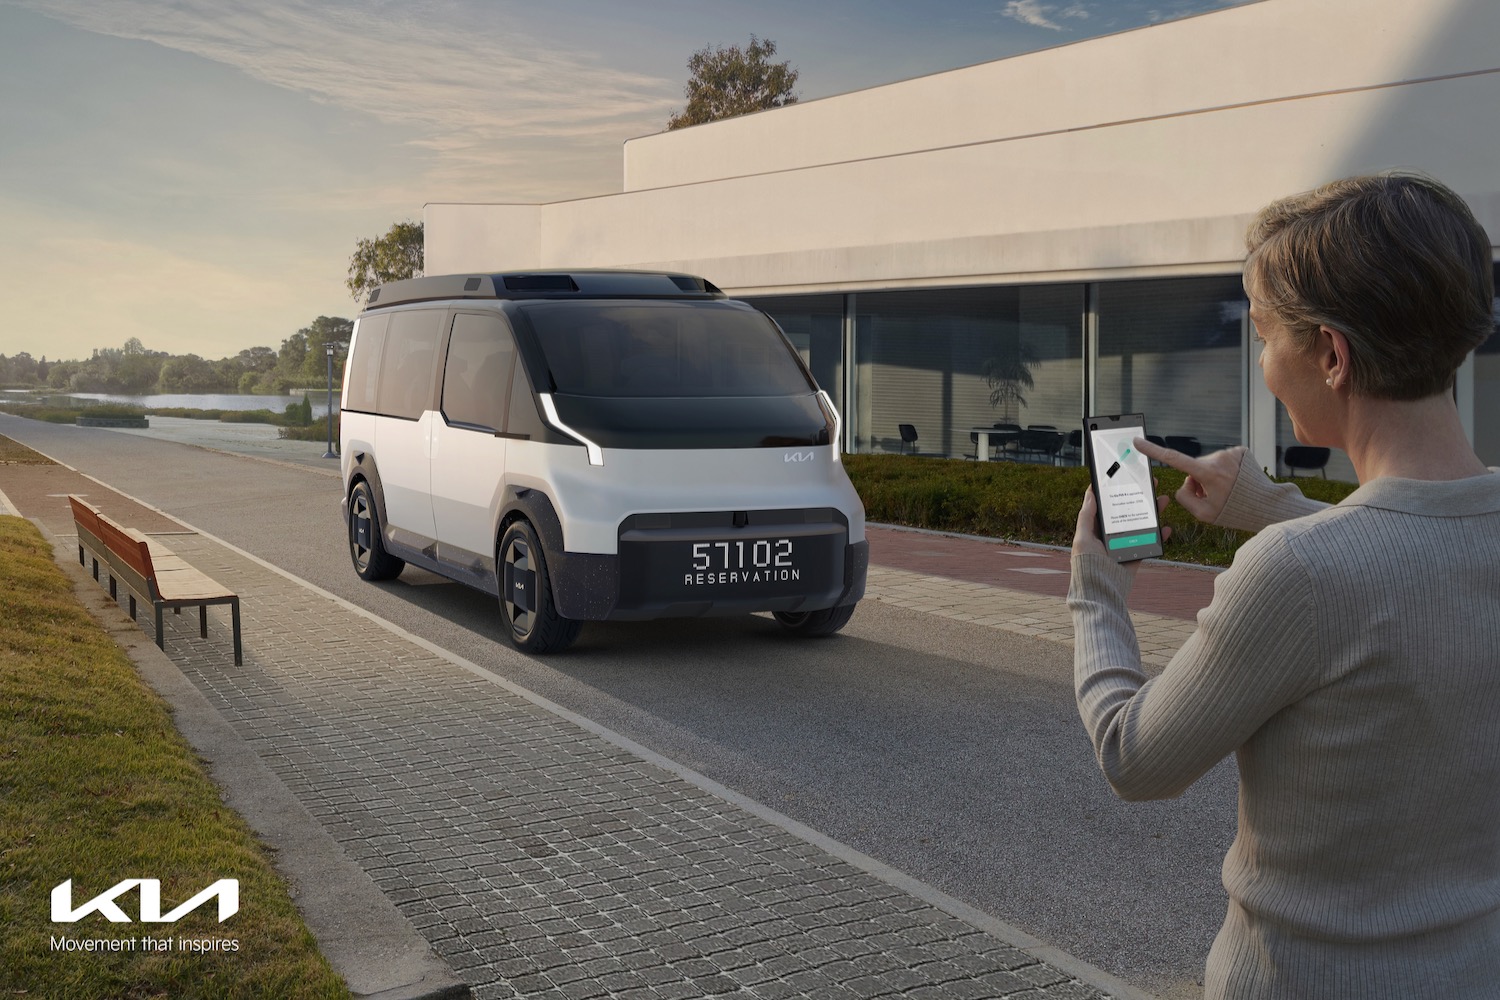 A Kia Concept PV5 being hailed by a person via smartphone.